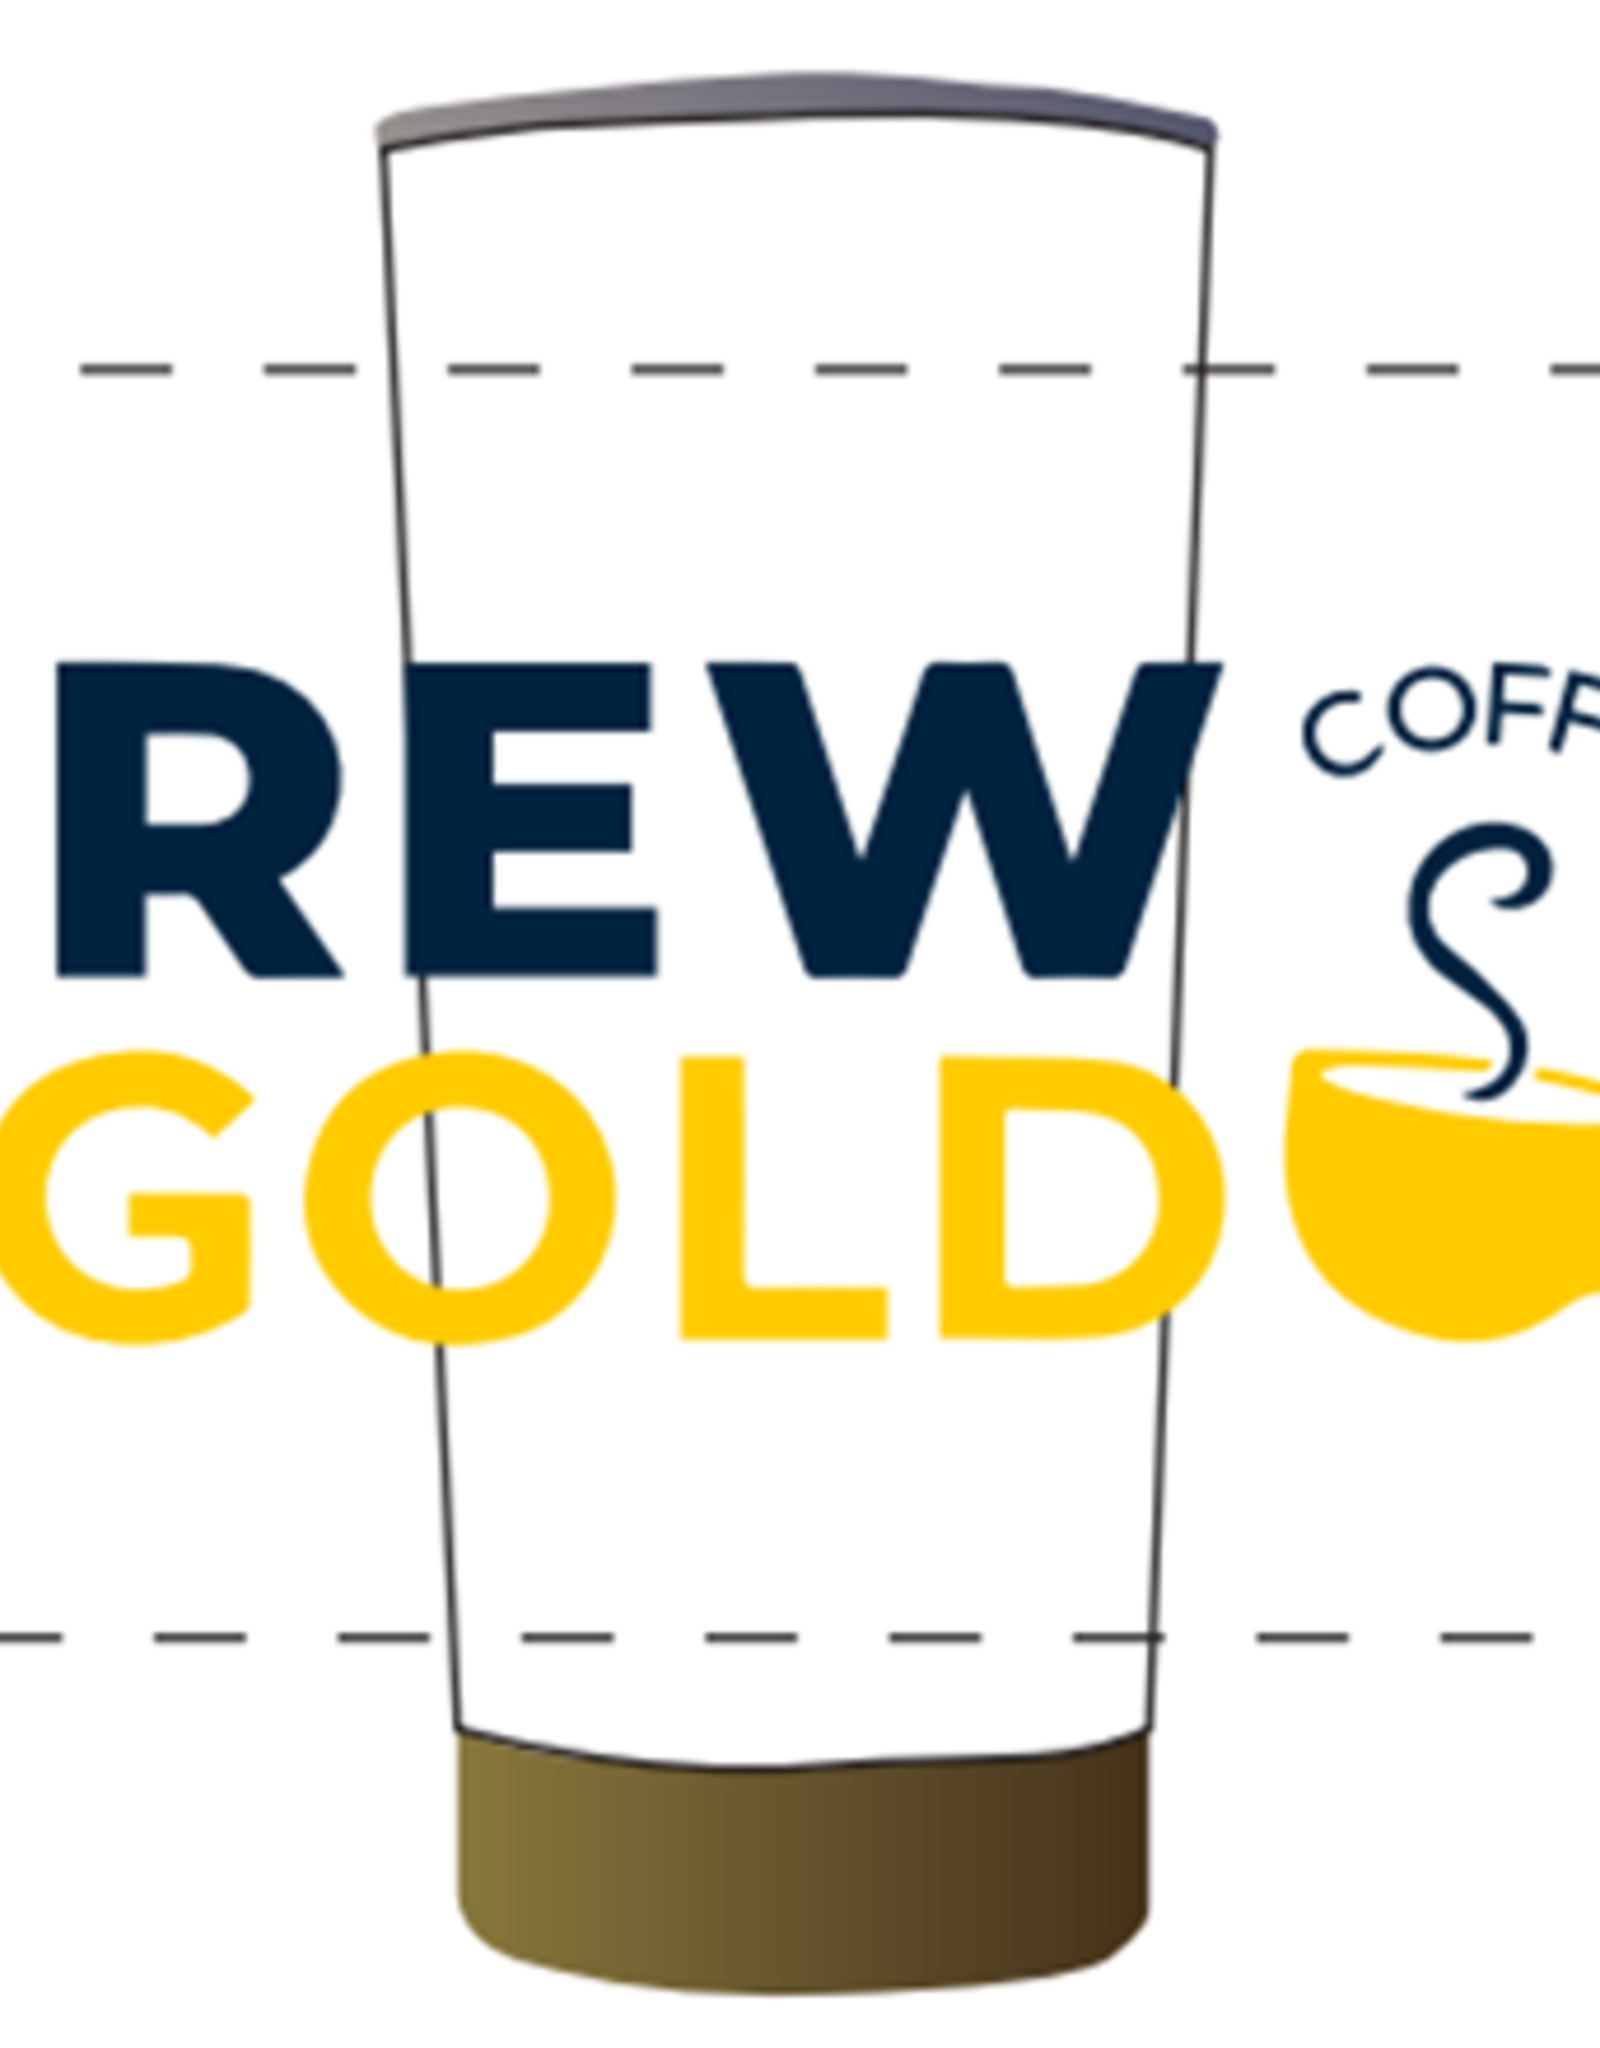 Brew & Gold 20oz WHITE Tumbler (DISCOUNTS NOT ALLOWED ON ITEM)